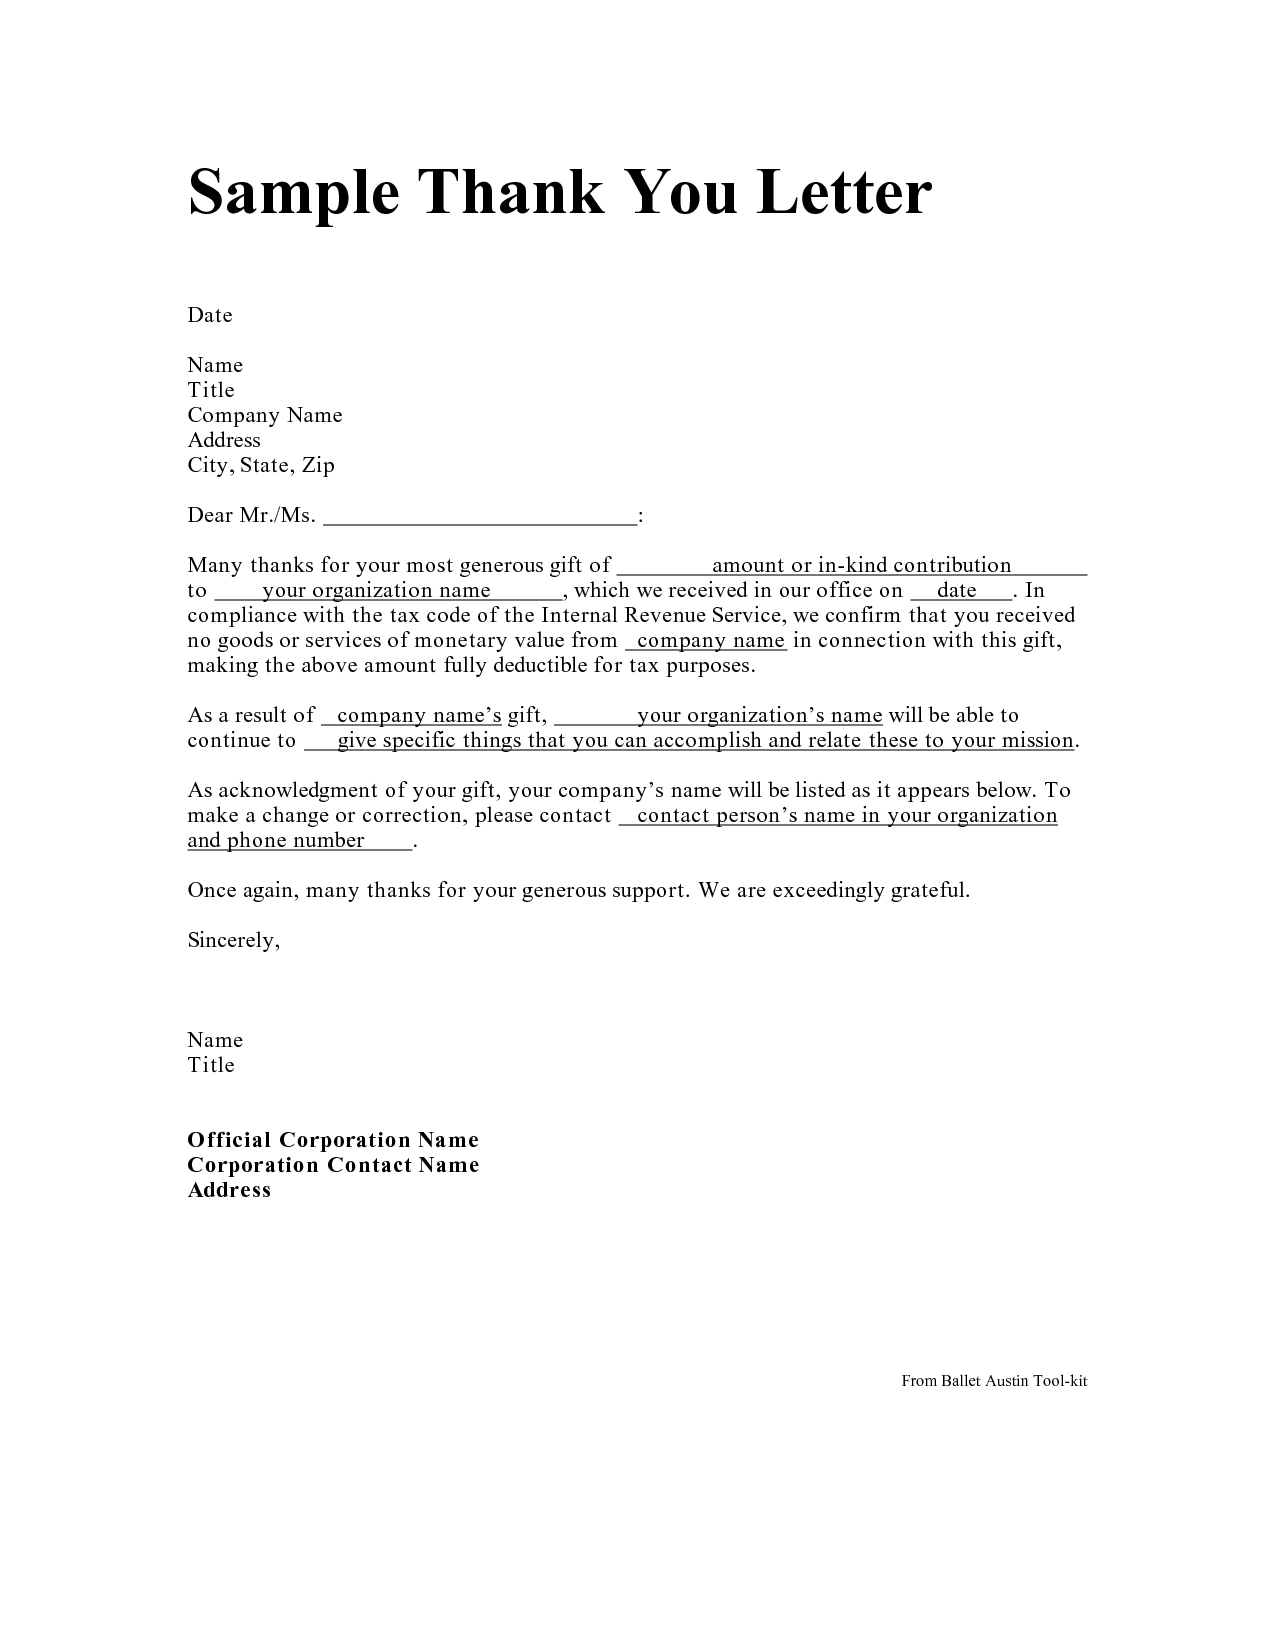 Gift Certificate Letter Template - Personal Thank You Letter Personal Thank You Letter Samples